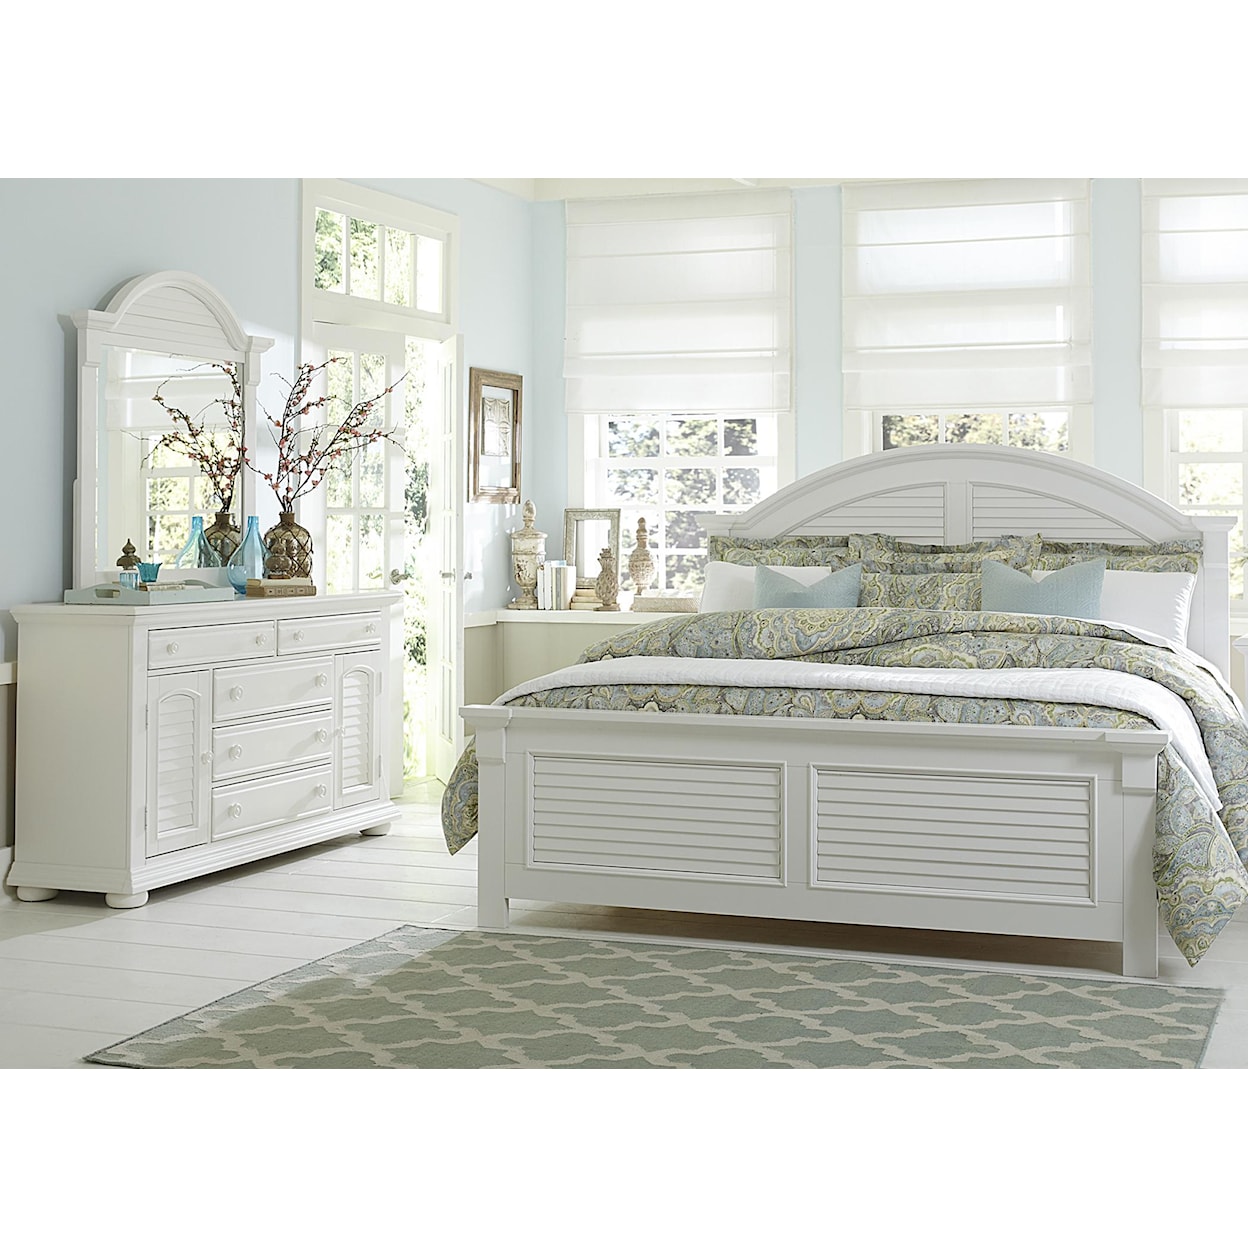 Libby Summer House King Bedroom Group